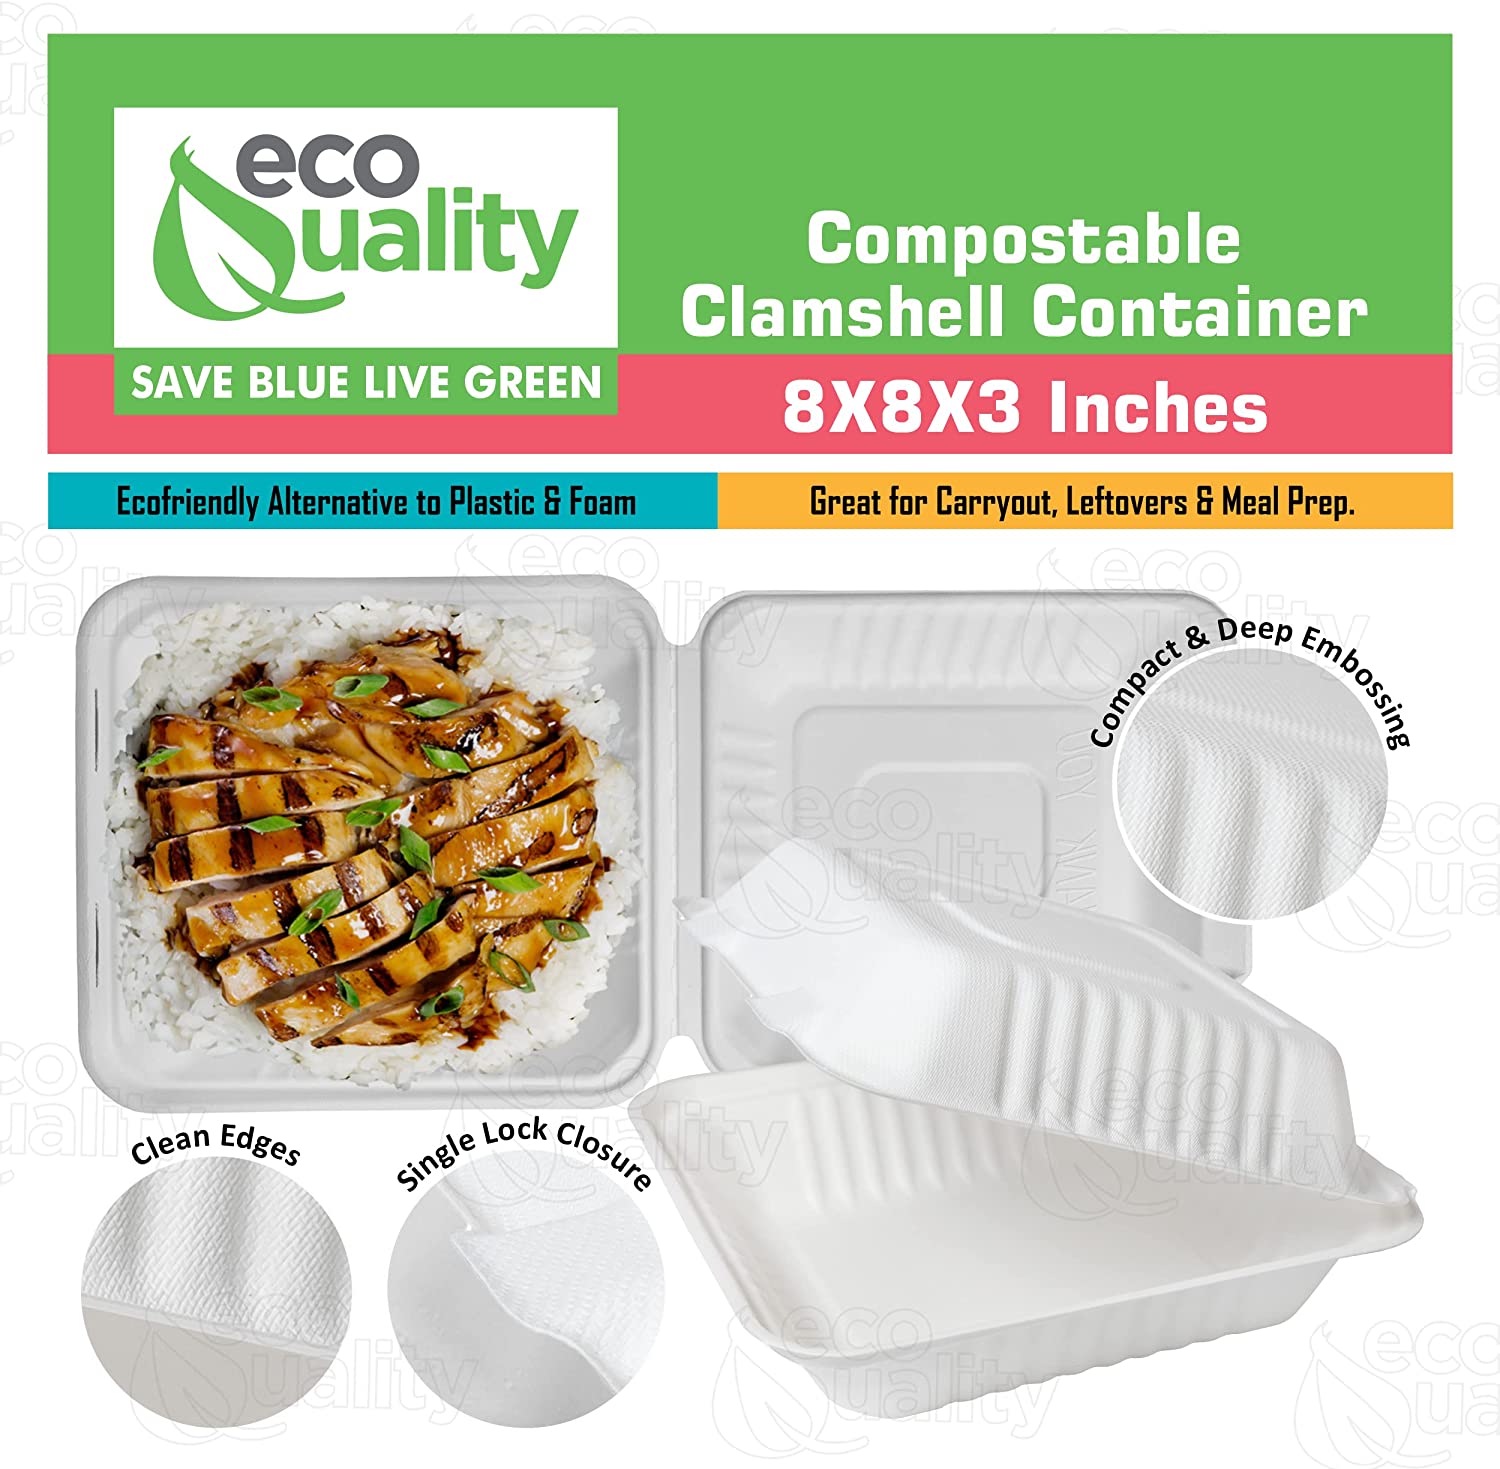 Compostable Square Hinged Clamshell Food TakeOut Box, Heavy Duty Disposable ToGo Containers with Lids, Biodegradable for Restaurants, Food Trucks